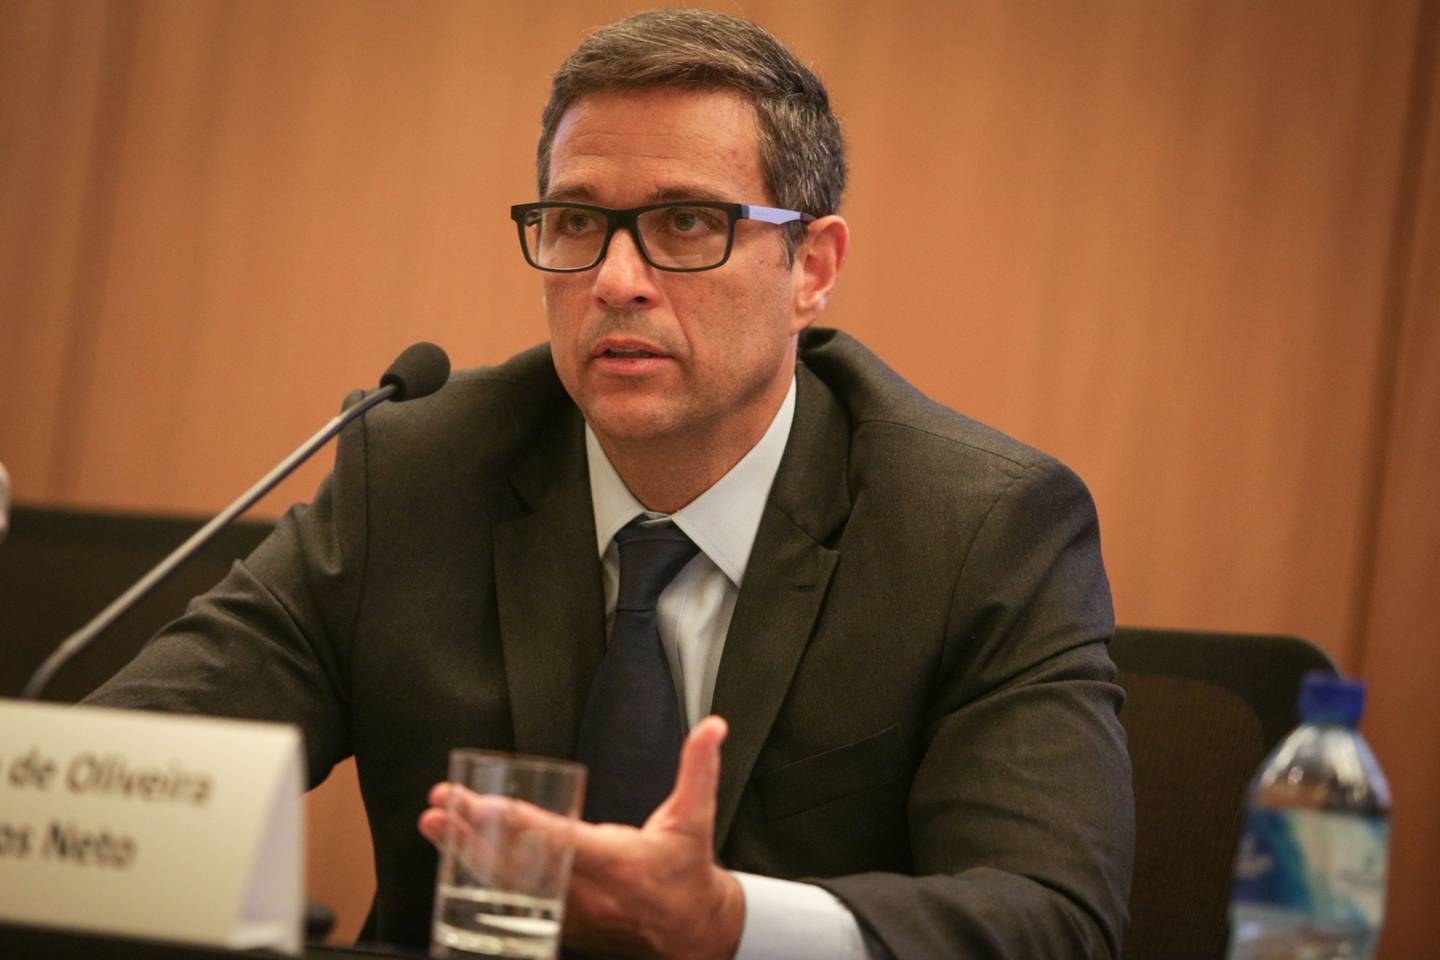 Roberto Campos Neto, president of the Brazilian Central Bank: said he is open to talking with the government about the interest rate (Andre Coelho/Bloomberg)